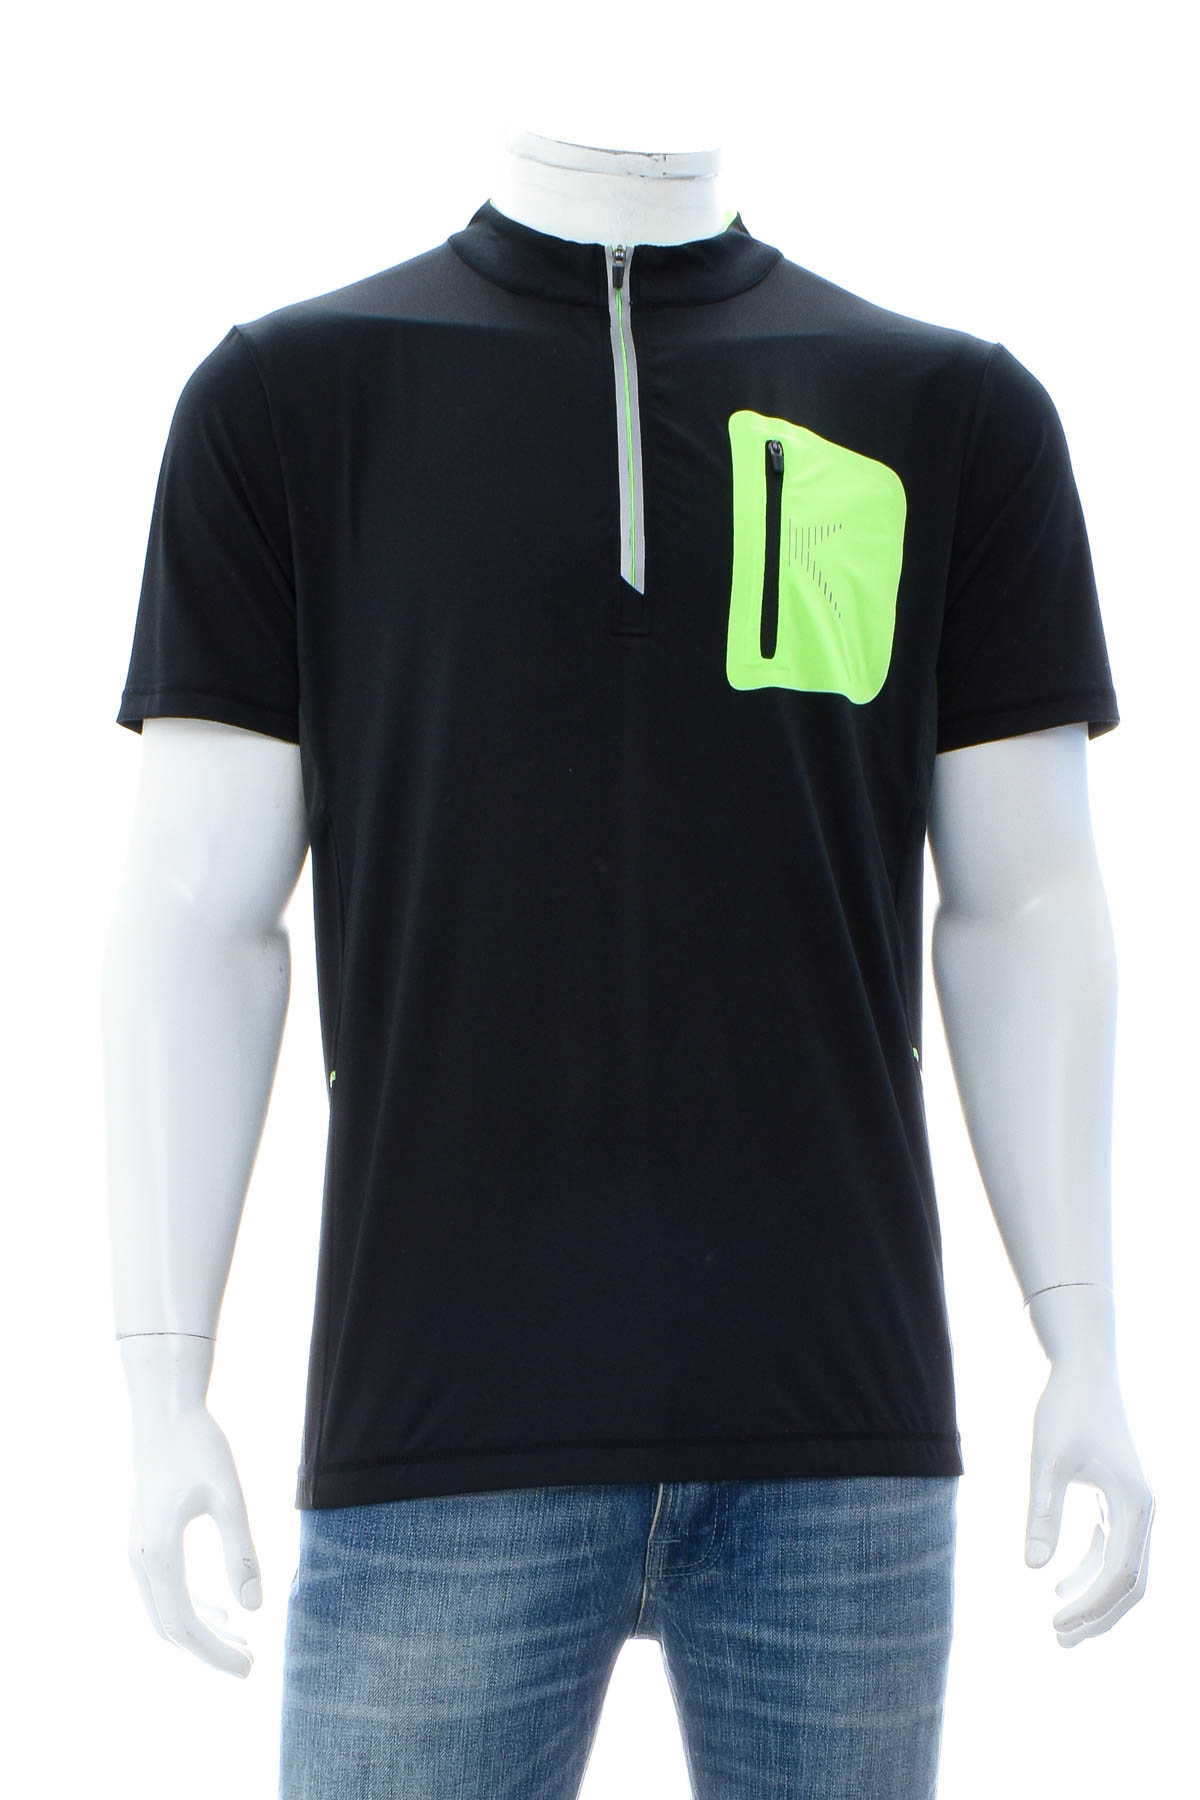 Men's T-shirt for cycling - Rossi - 0